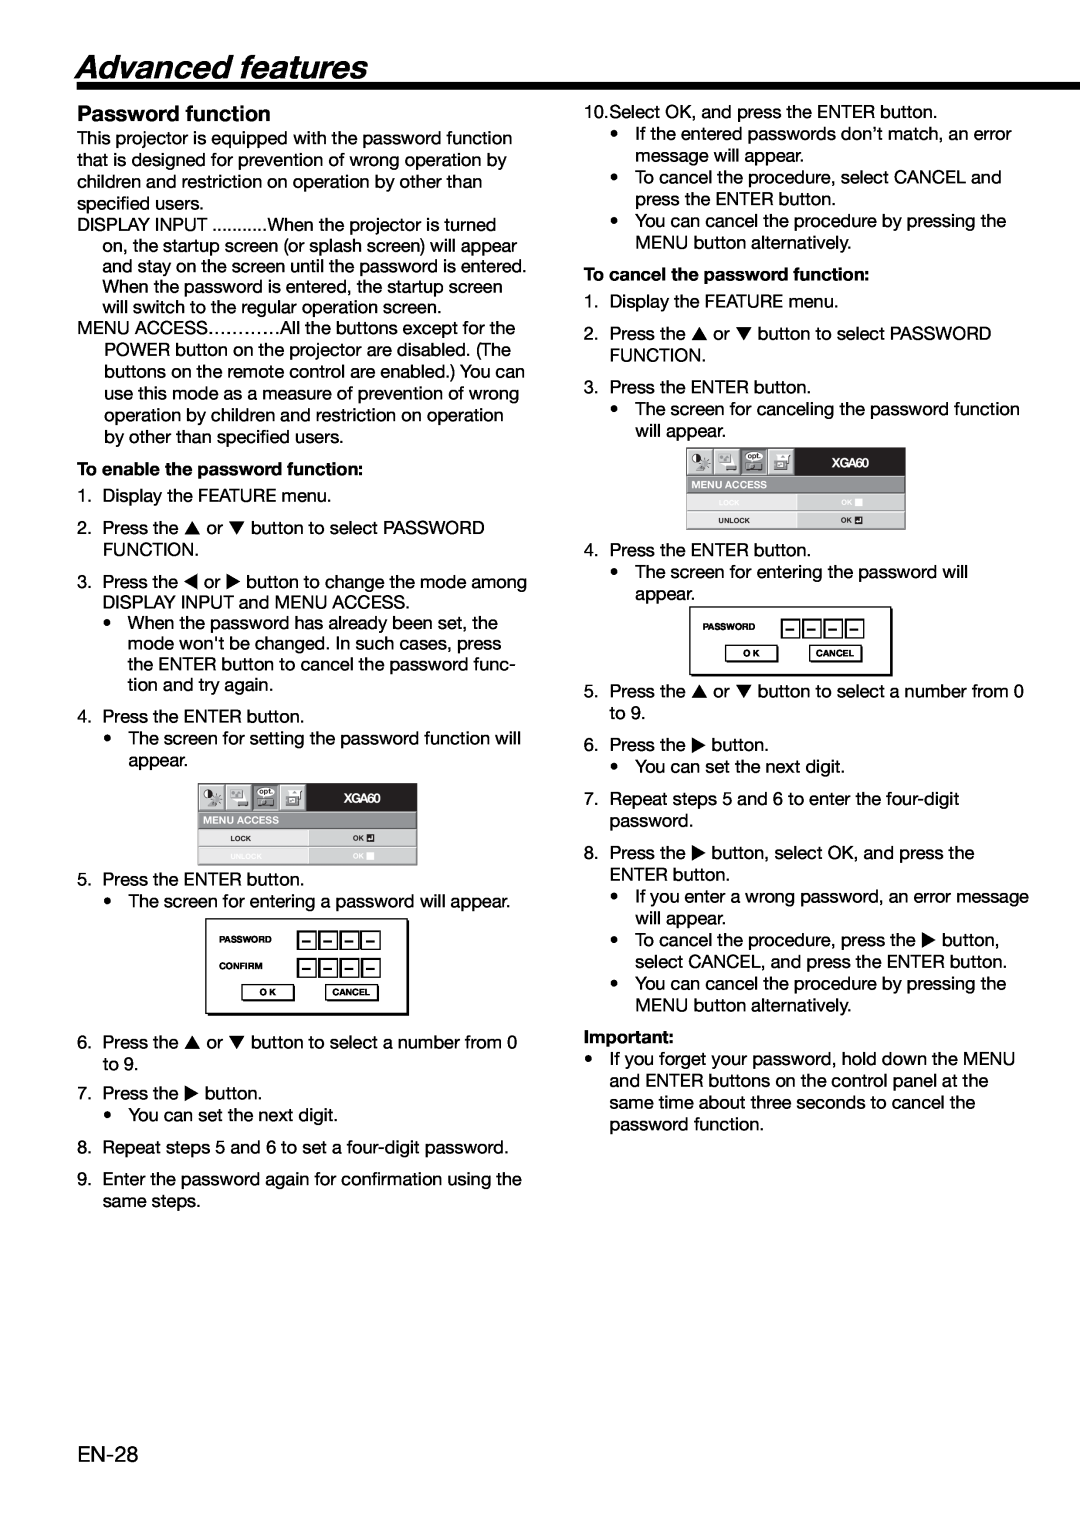 Mitsubishi Electronics XD460U user manual Advanced features, Password function, To enable the password function 